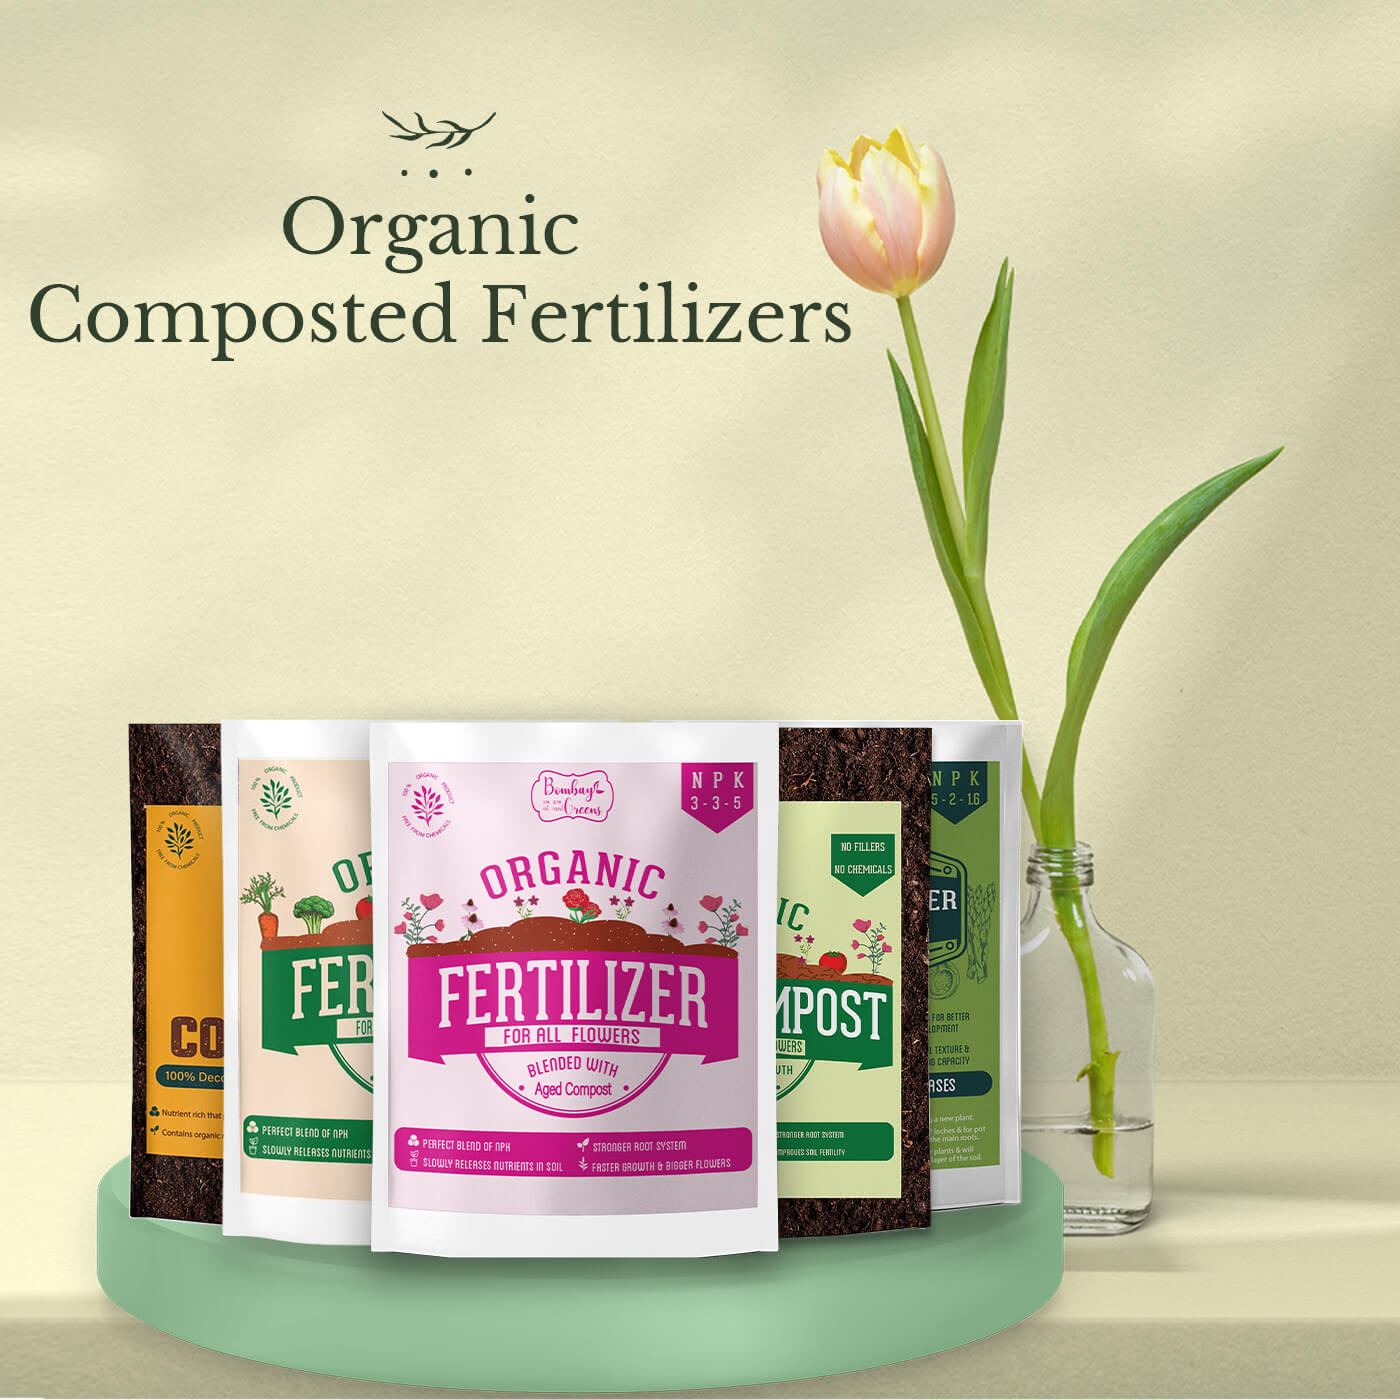 Organic Composted Fertilizers